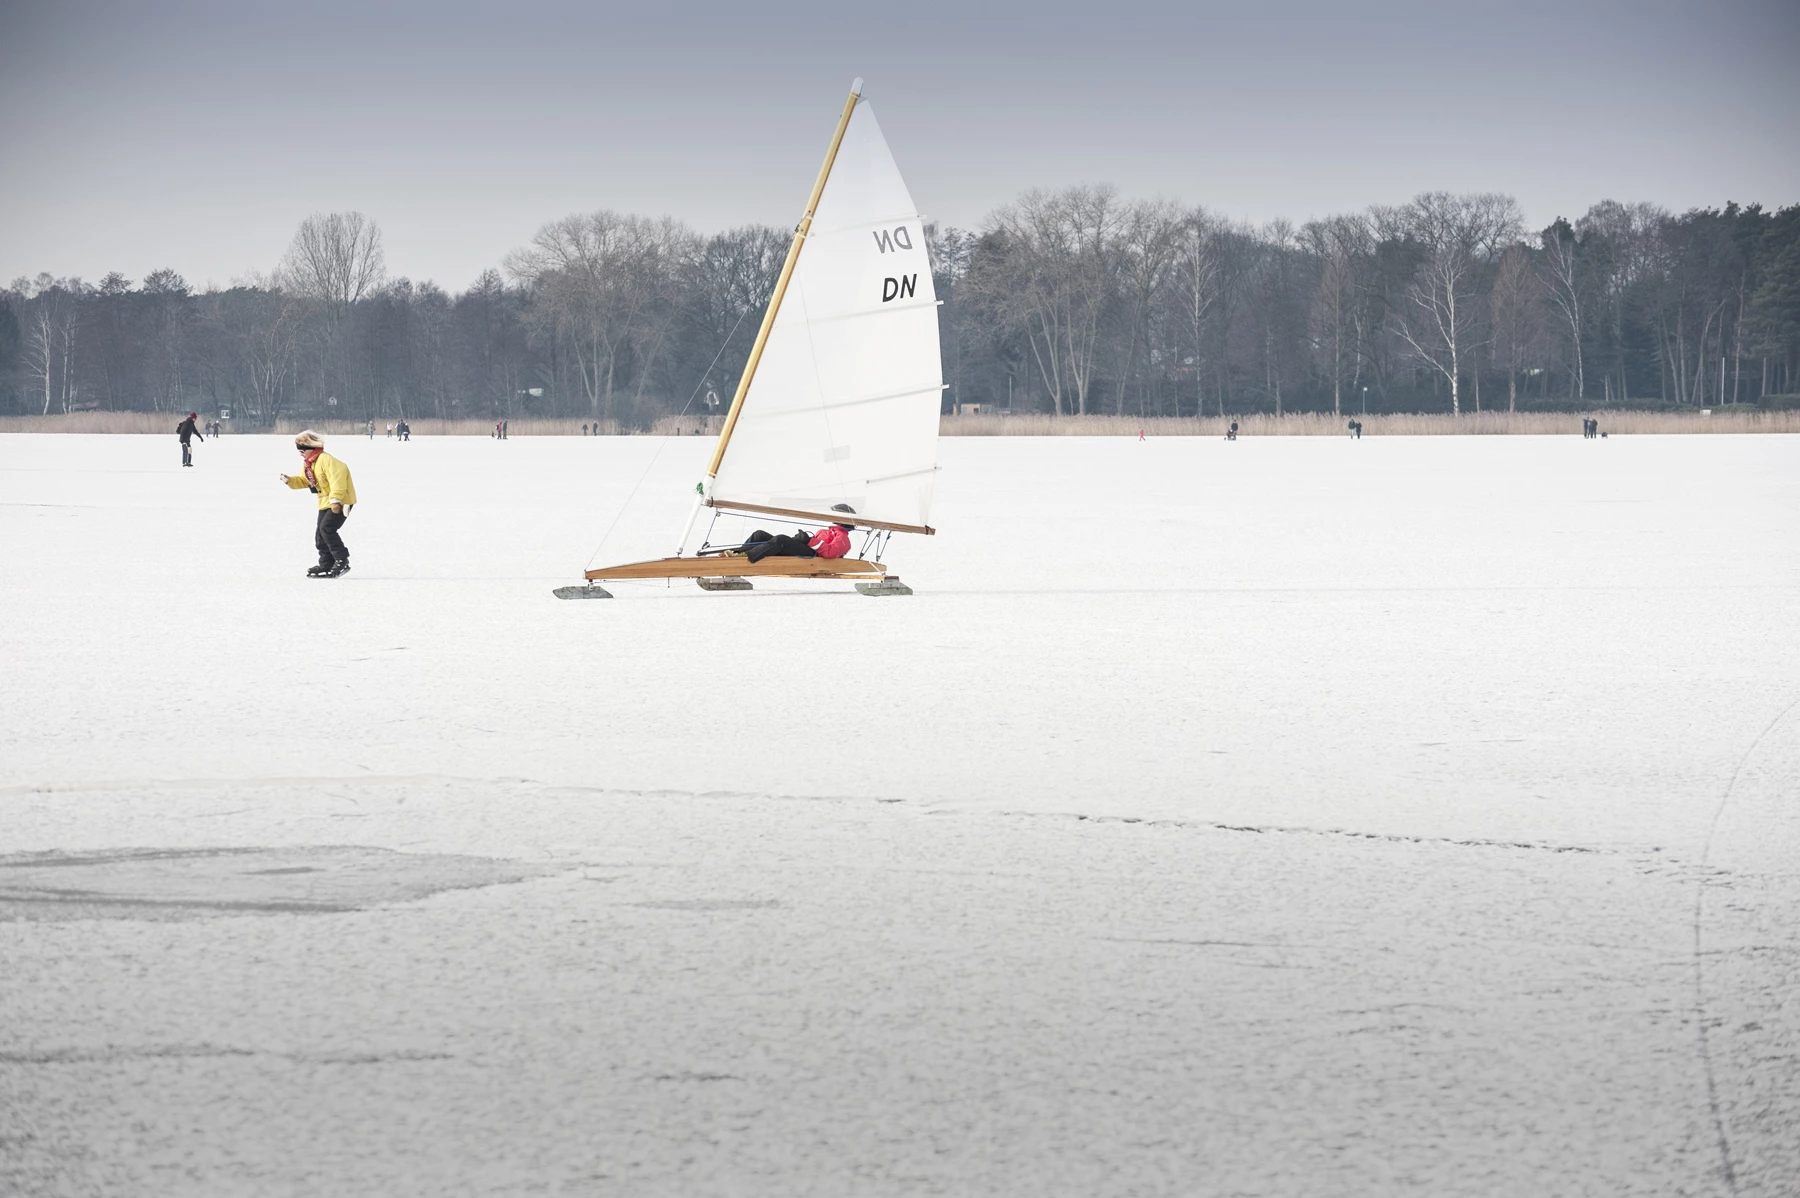 A person ice yachting on a frozen lake with other people ice skating